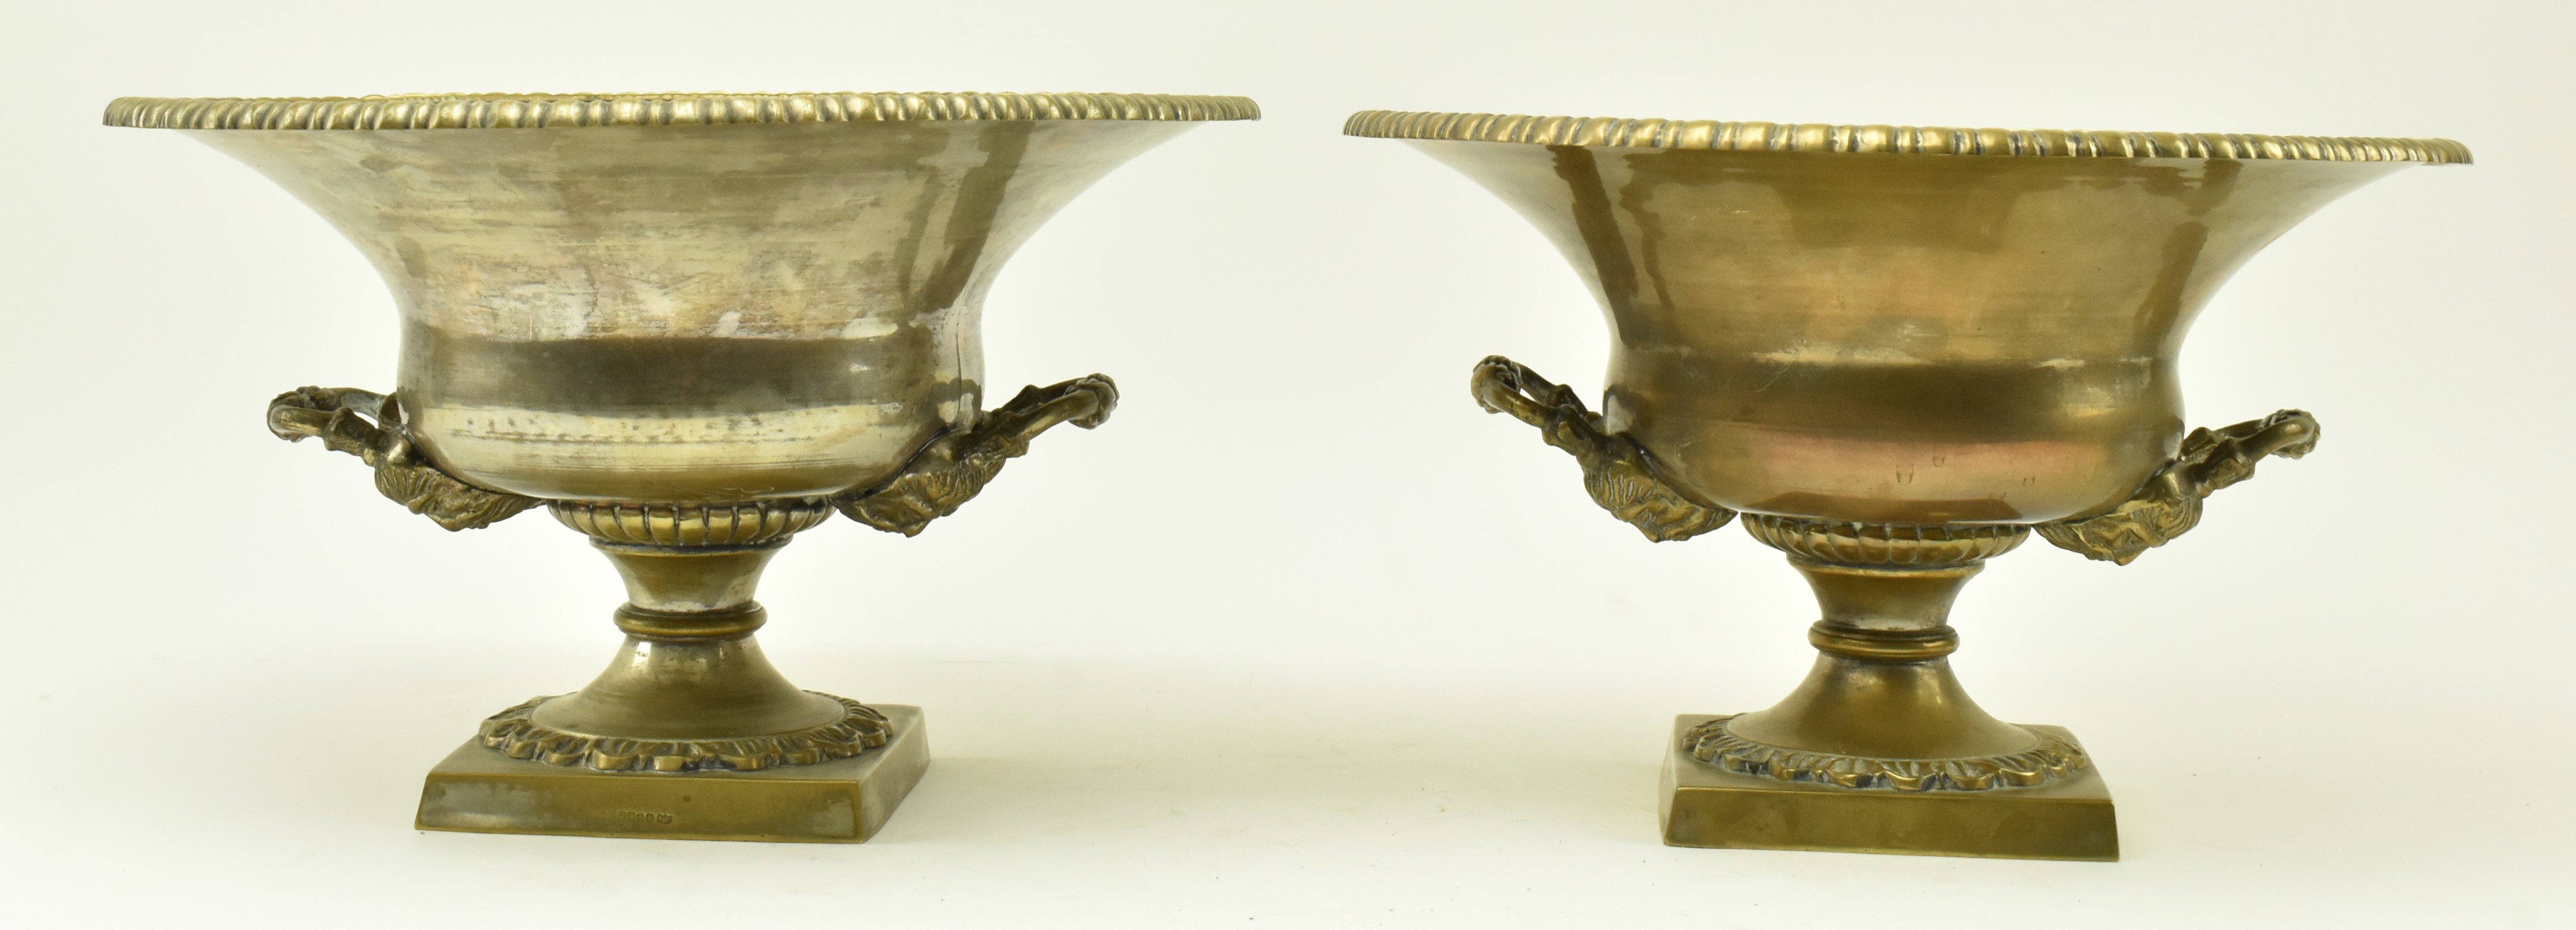 PAIR OF SILVERED METAL CLASSICAL STYLE HANDLED URNS - Image 3 of 7